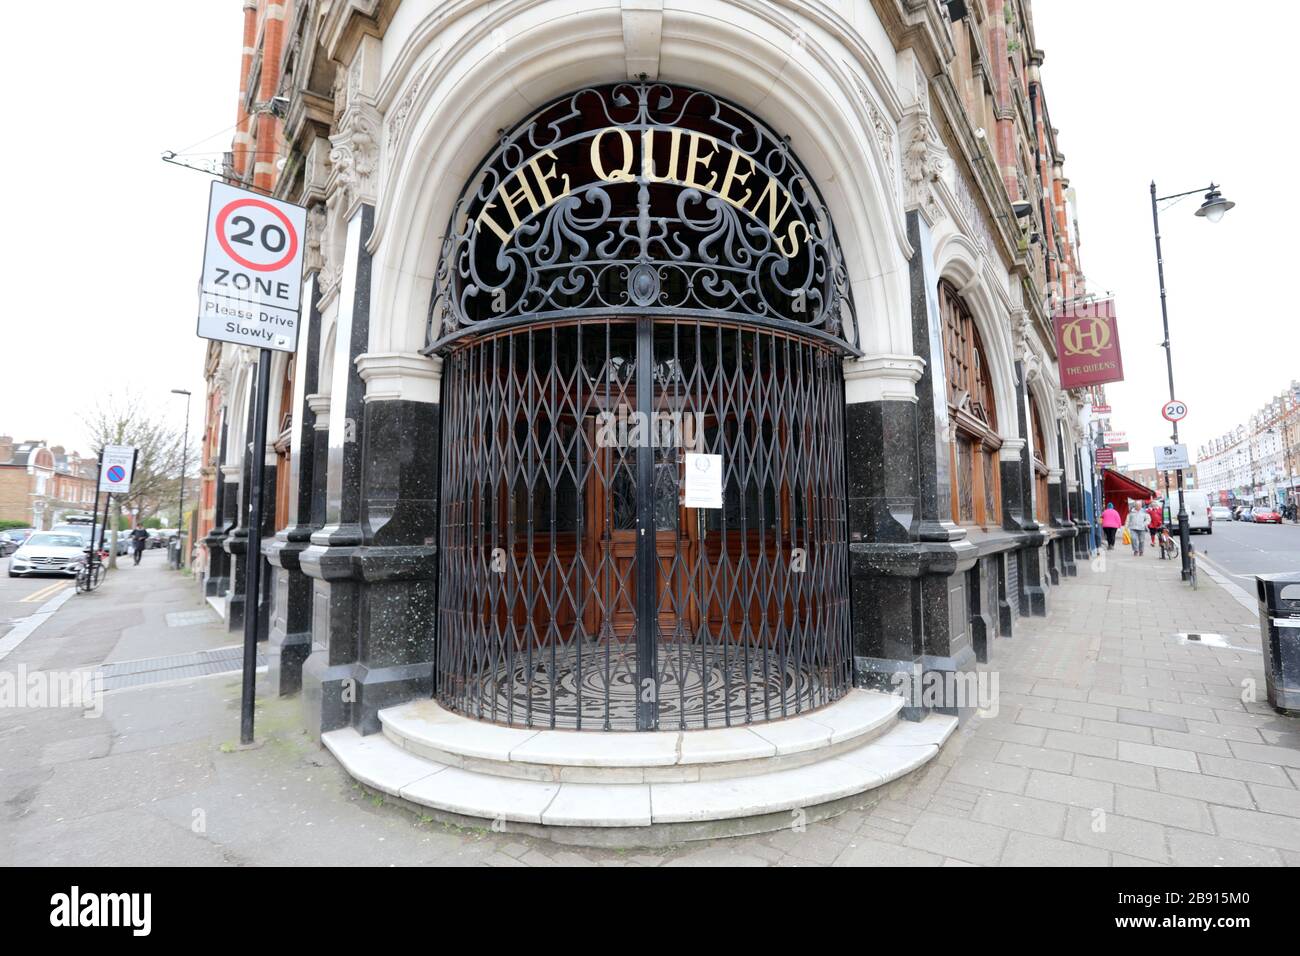 London / UK – March 20, 2020: The Queens pub in Crouch End, north London, closed because of the coronavirus pandemic, in line with government orders. Stock Photo